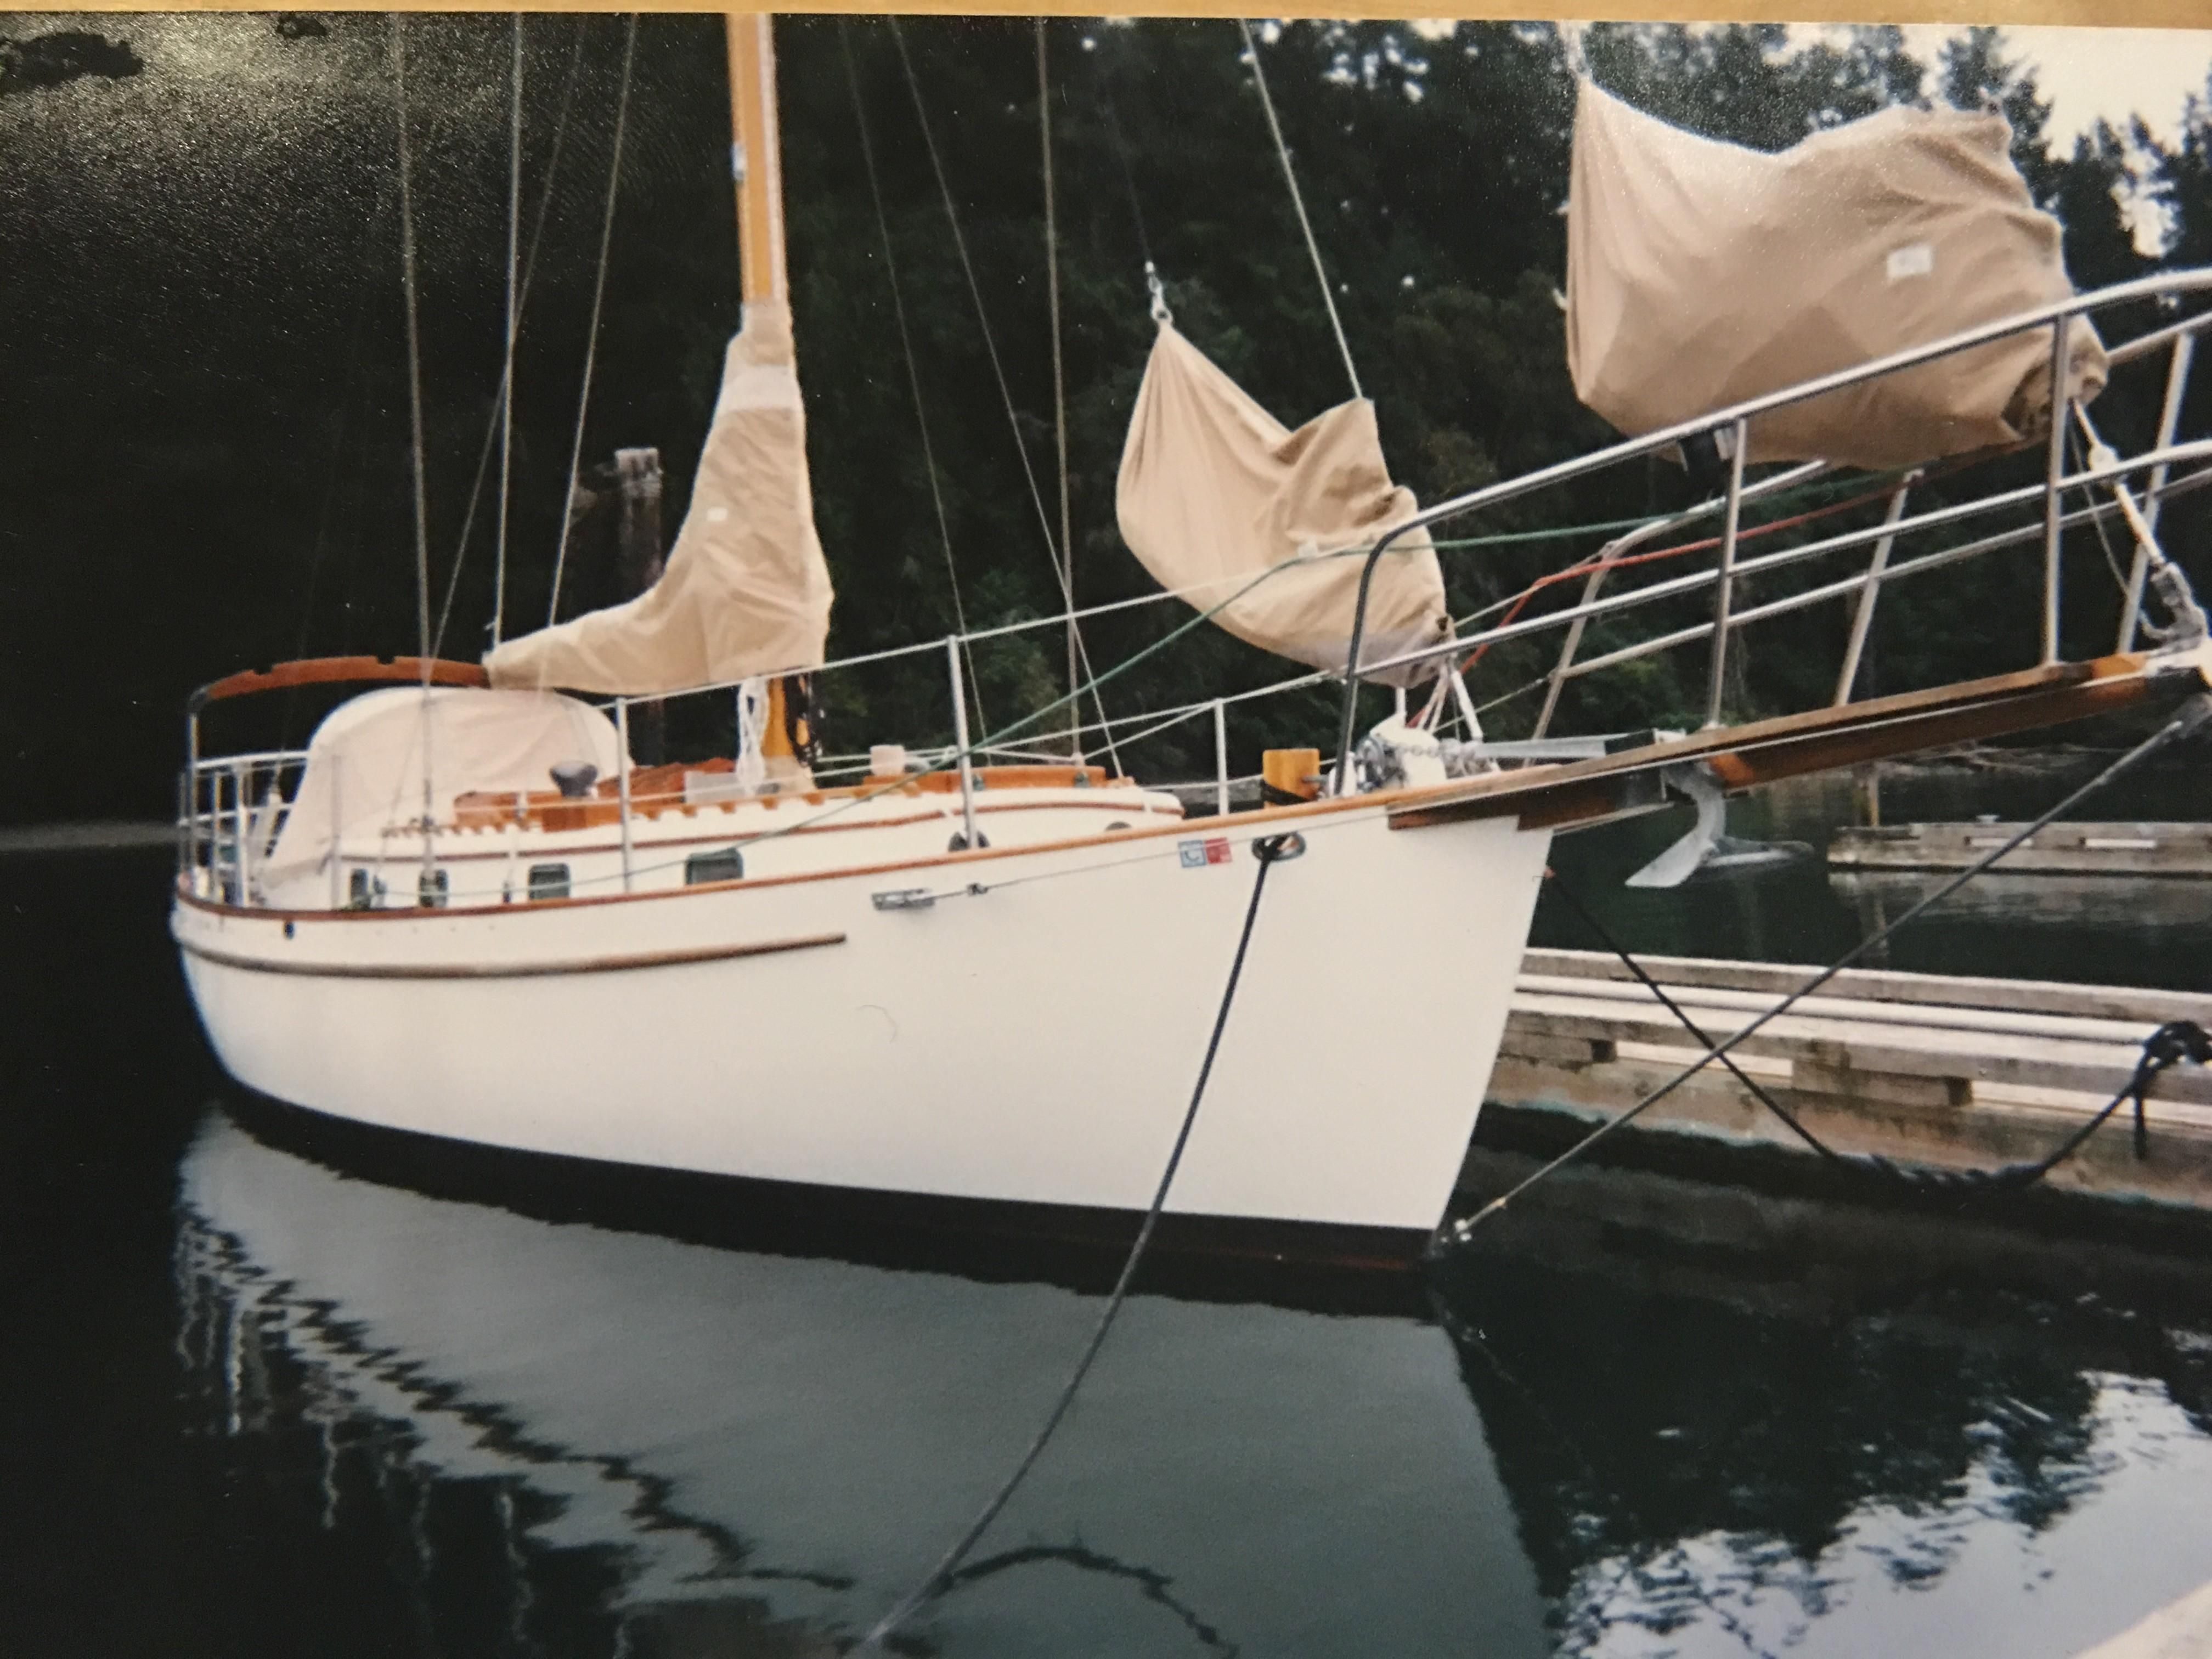 cape george yachts